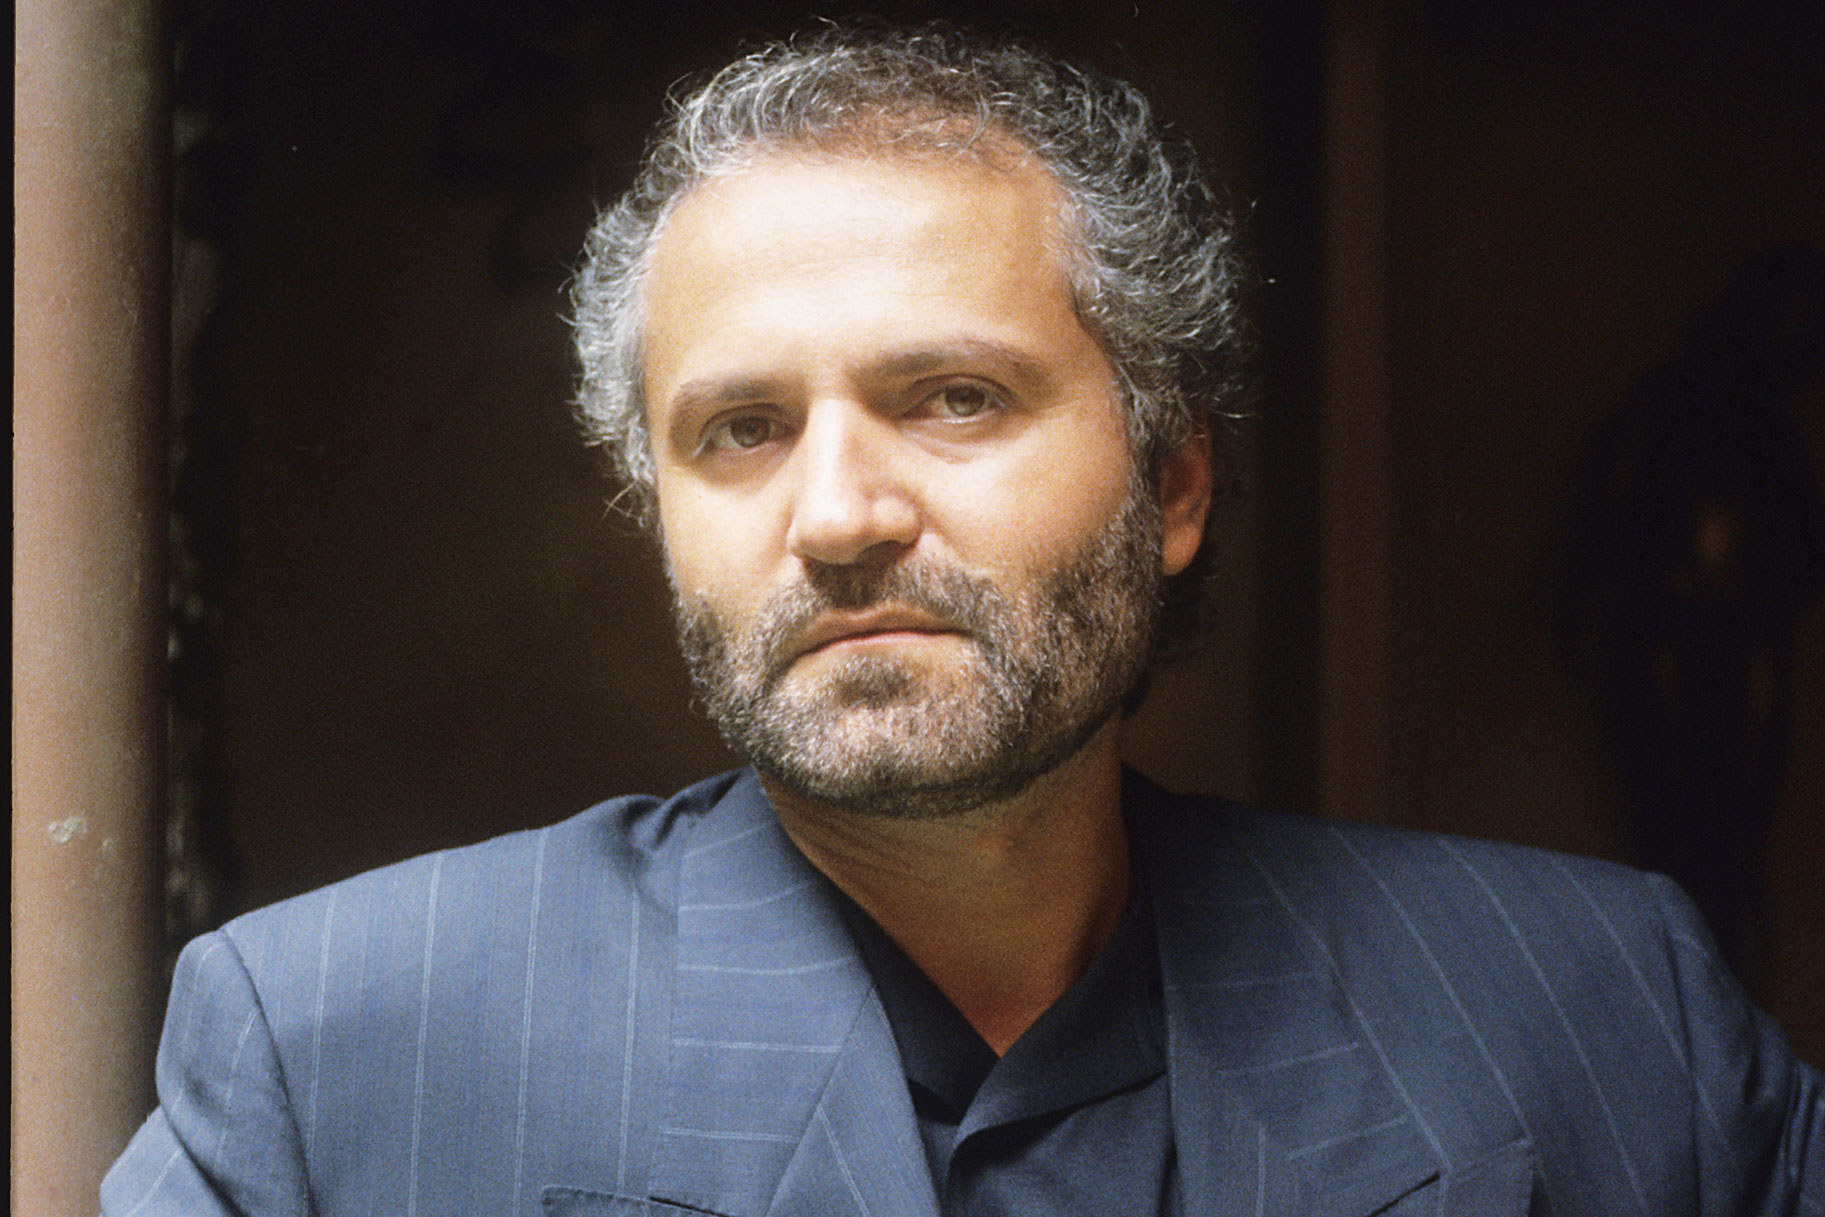 Two Men Found Dead In Former Home Of Gianni Versace | Crime News